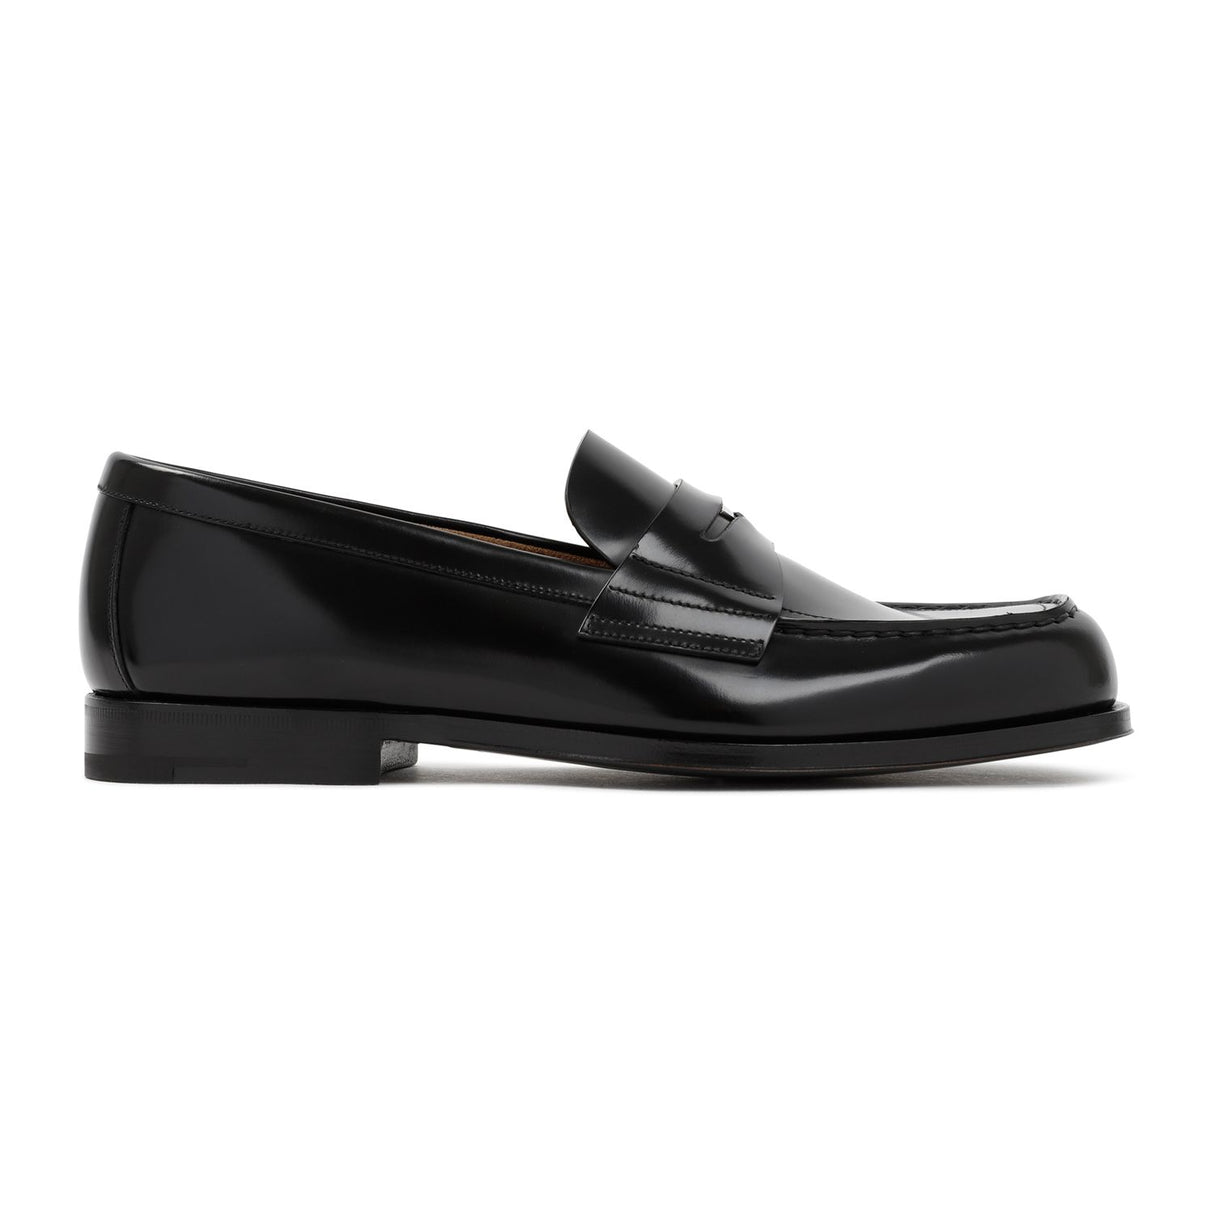 PRADA Black Leather Moccasins for Men - FW24 Collection